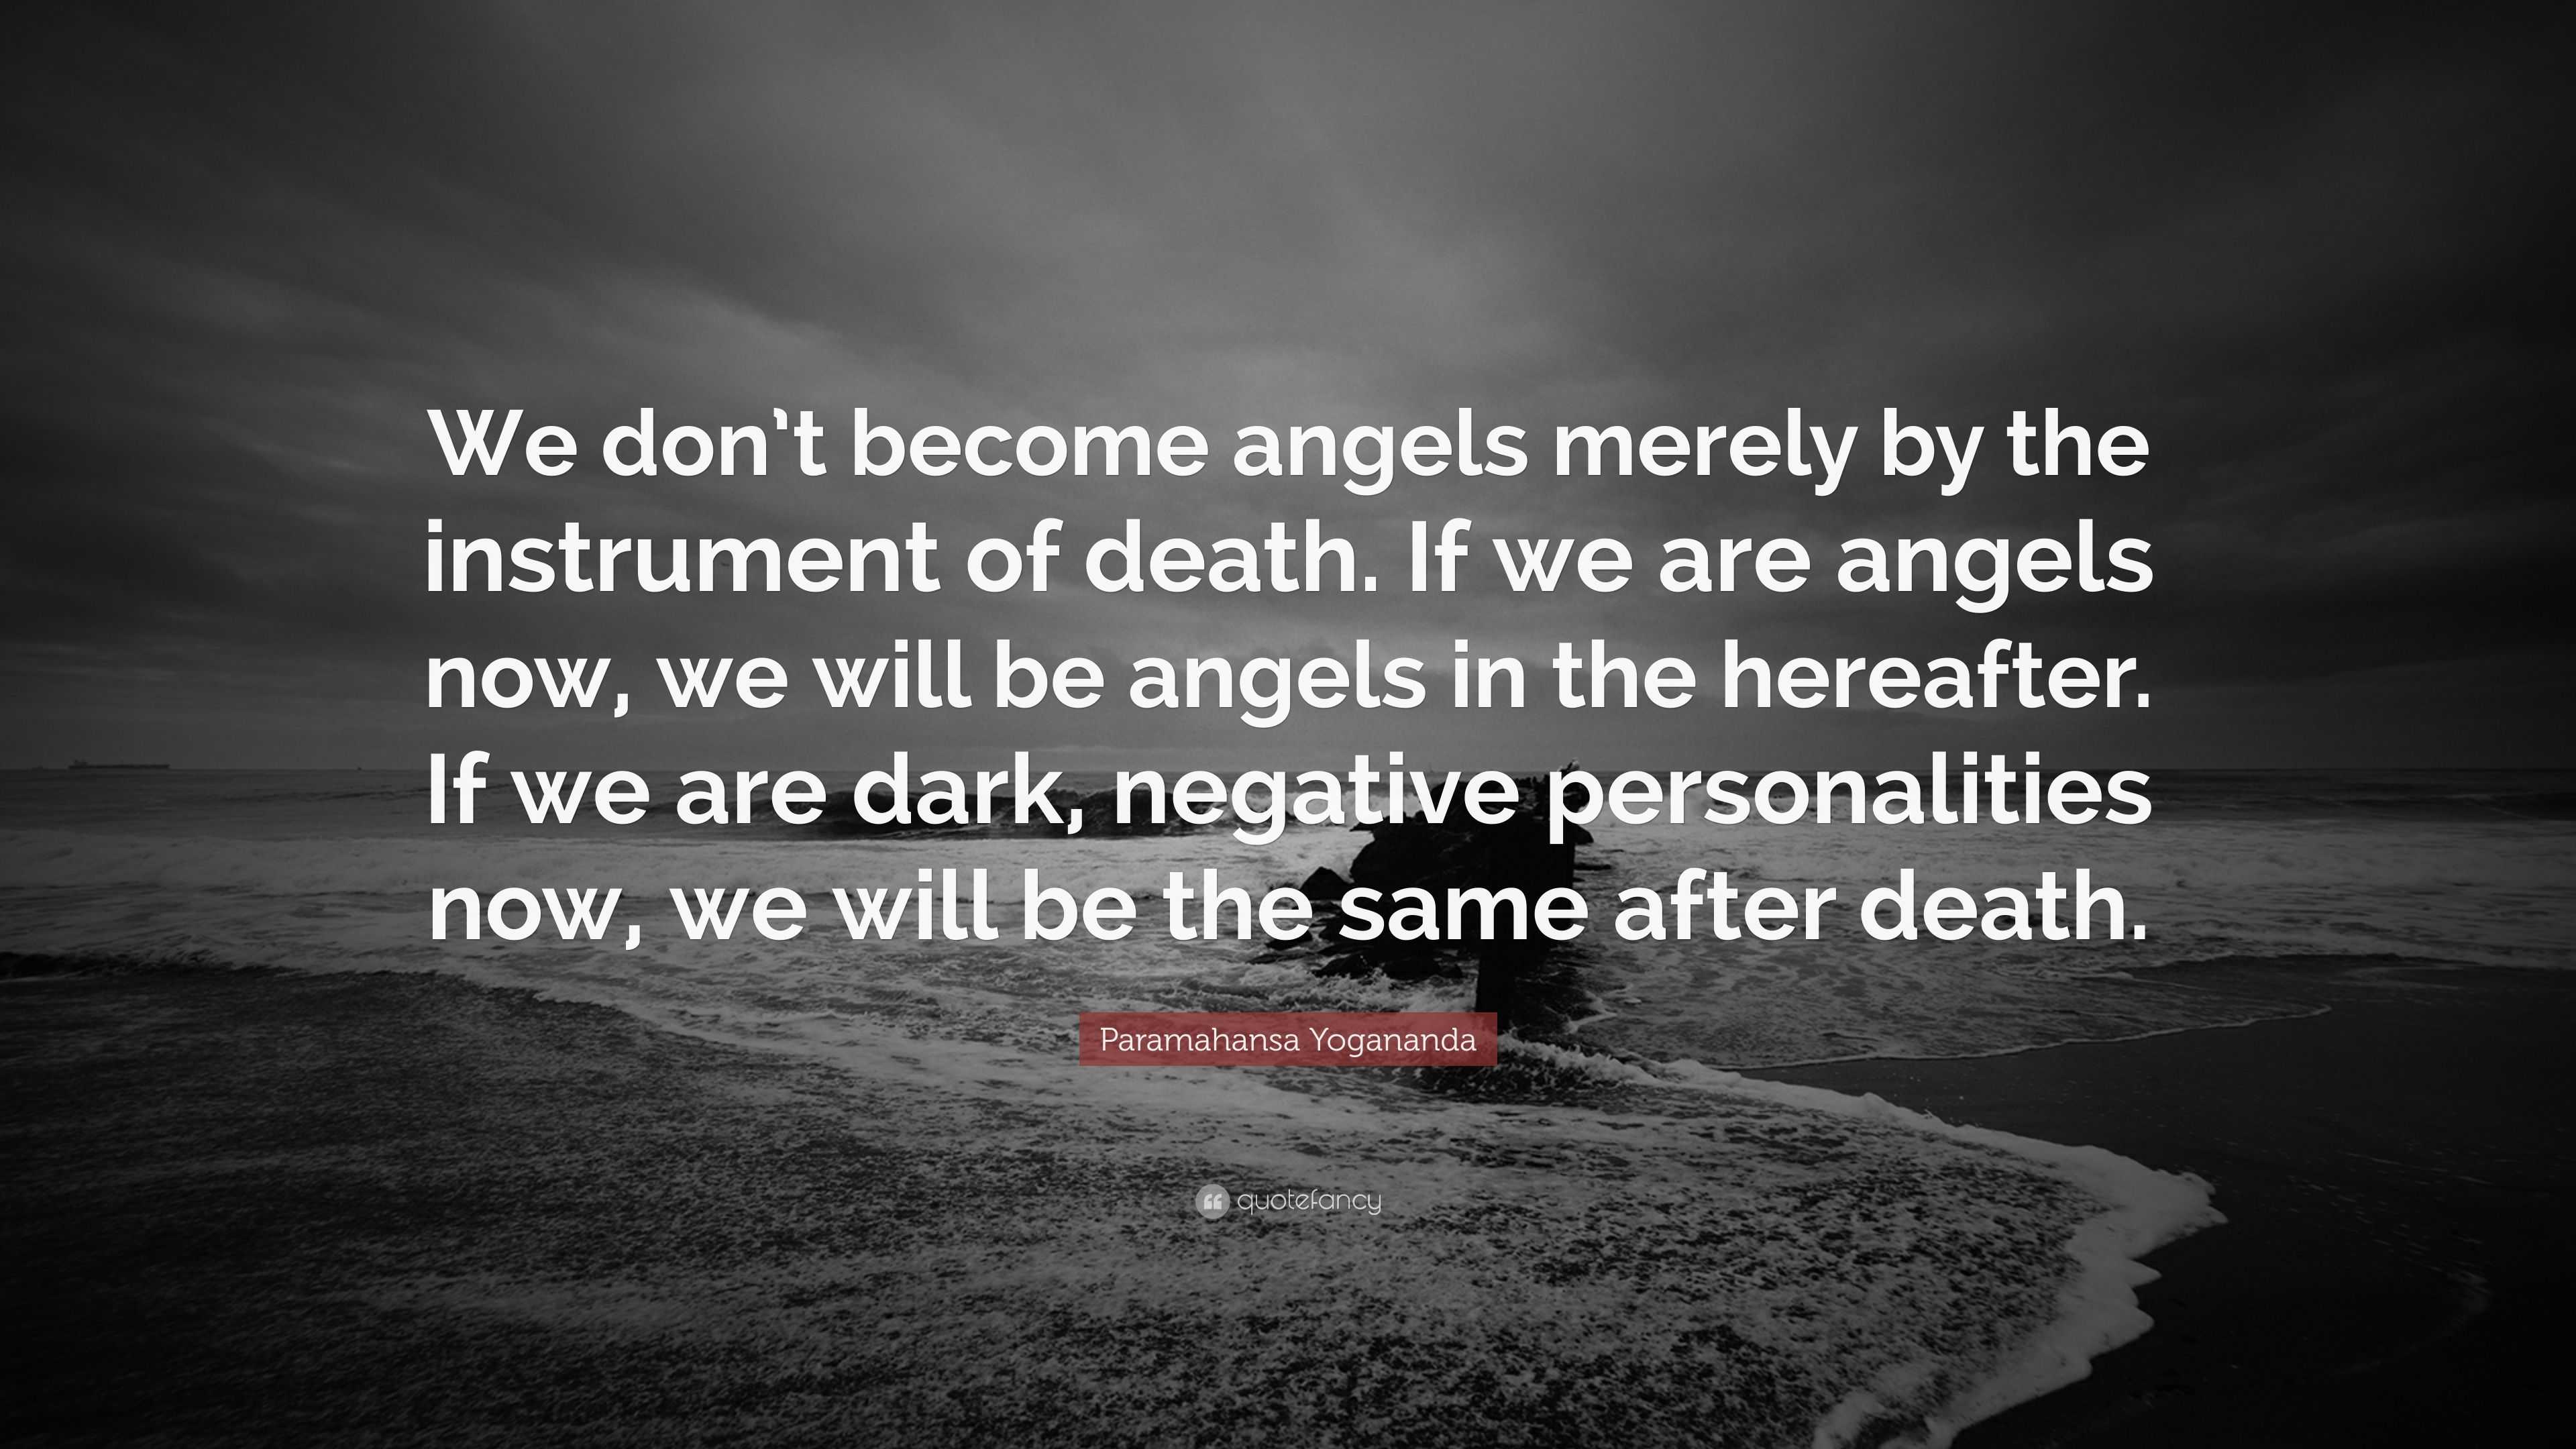 2063201 Paramahansa Yogananda Quote We don t become angels merely by the